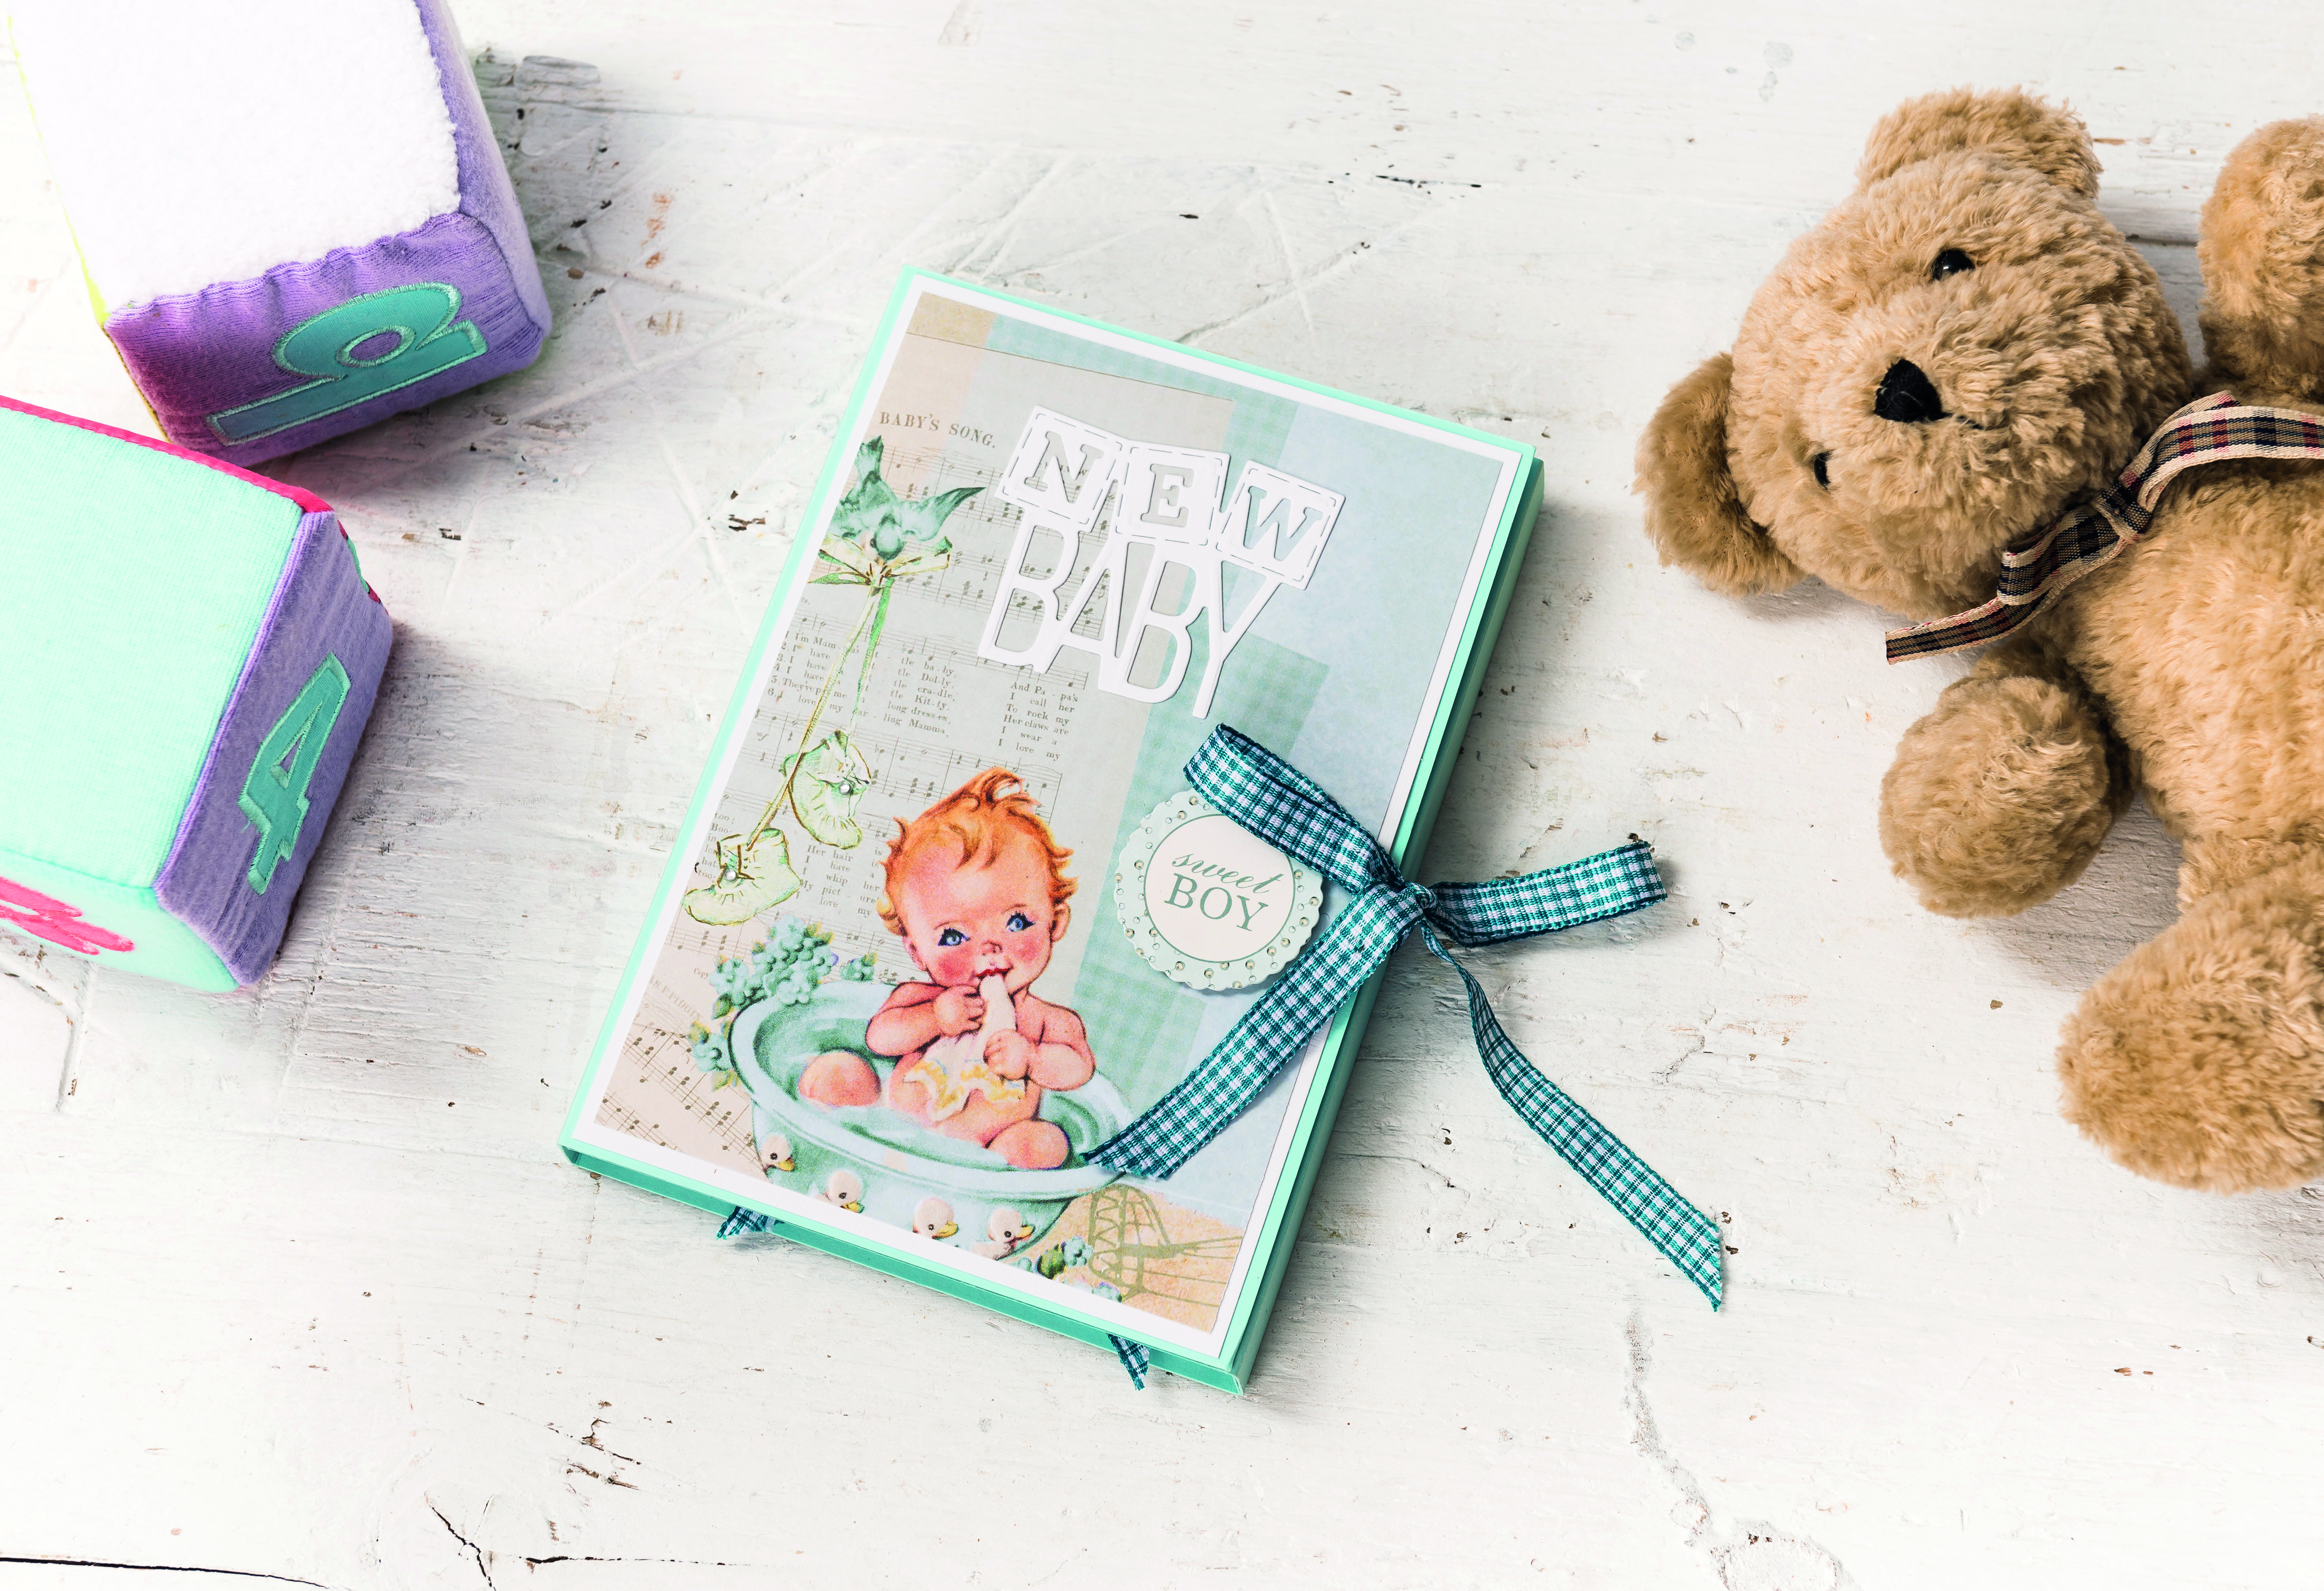 How to make a baby album or baby memory book